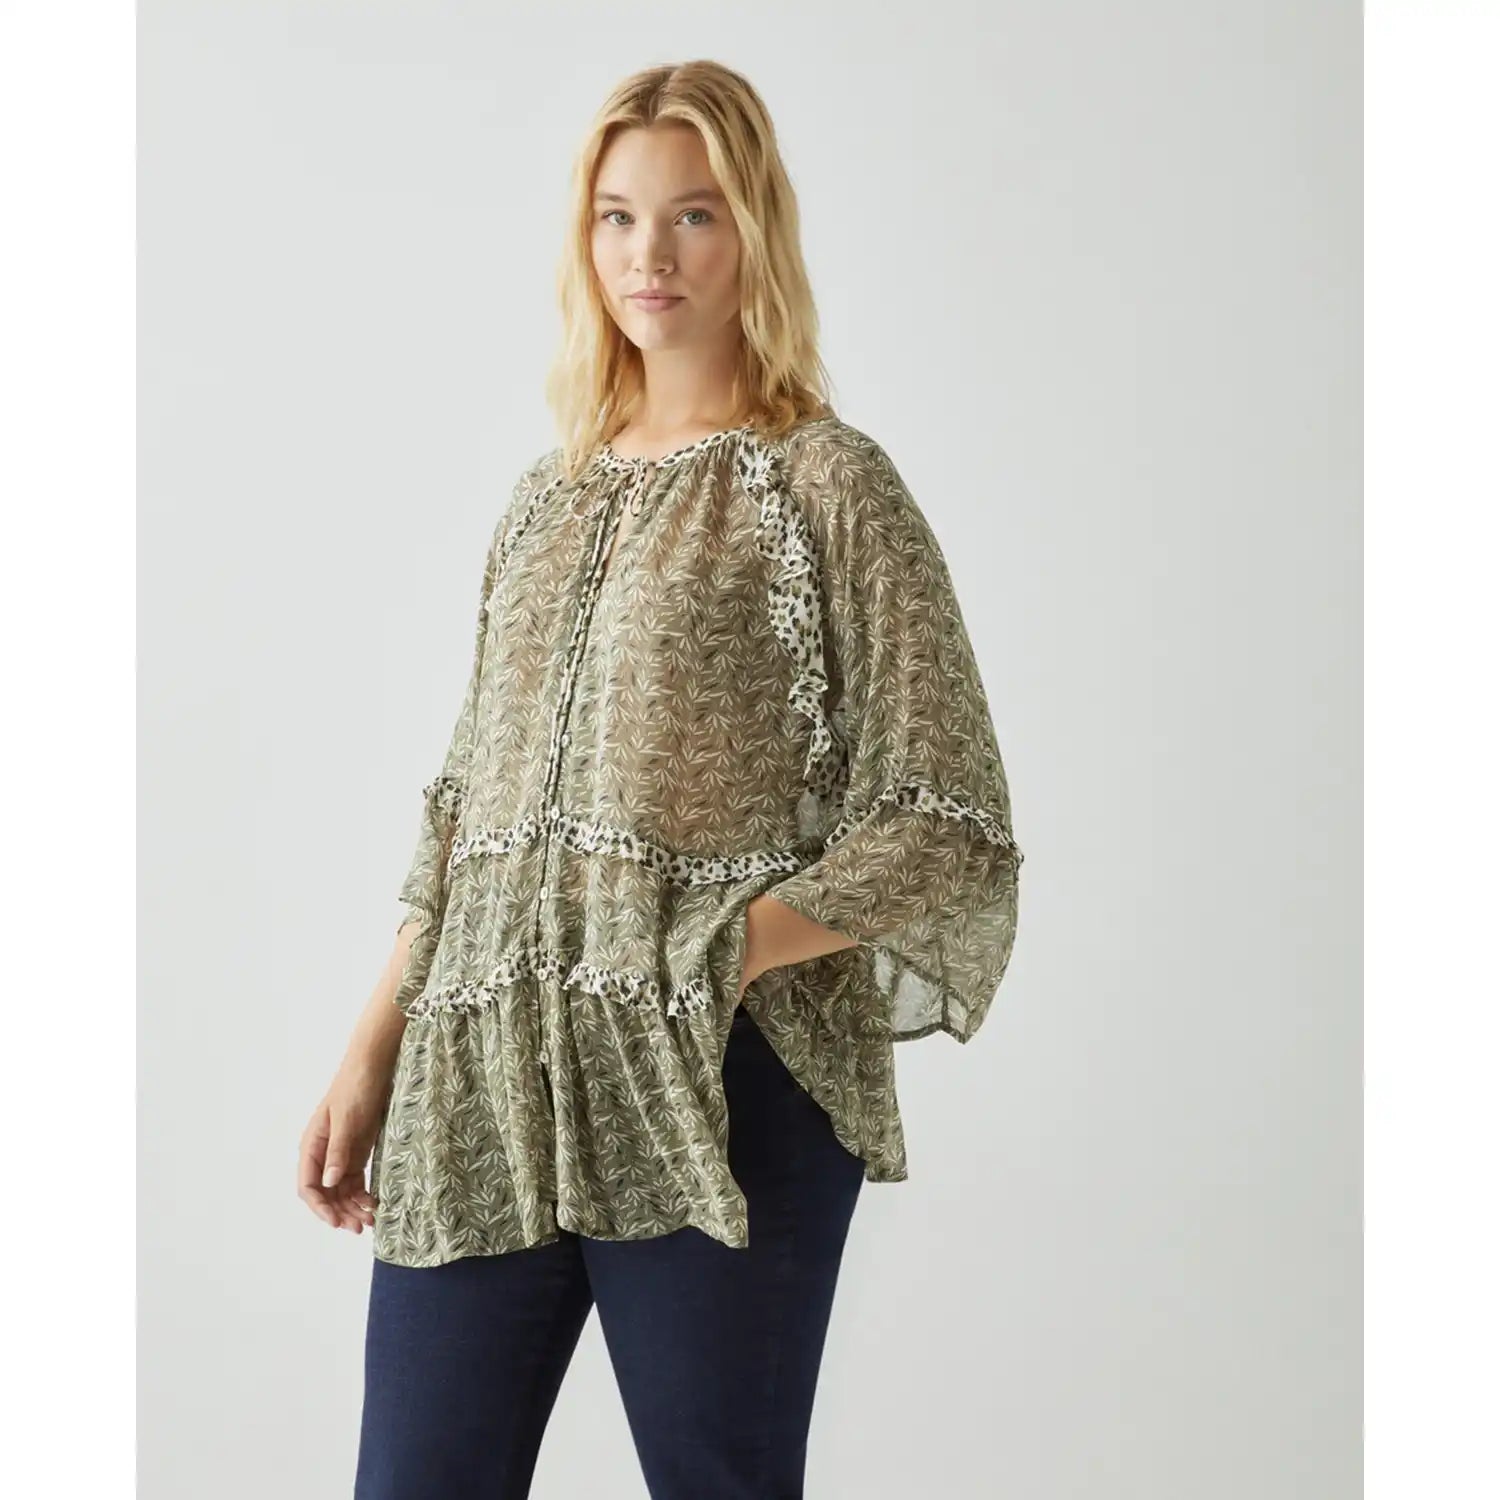 Couchel Ruffled Print Blouse - Multi 1 Shaws Department Stores